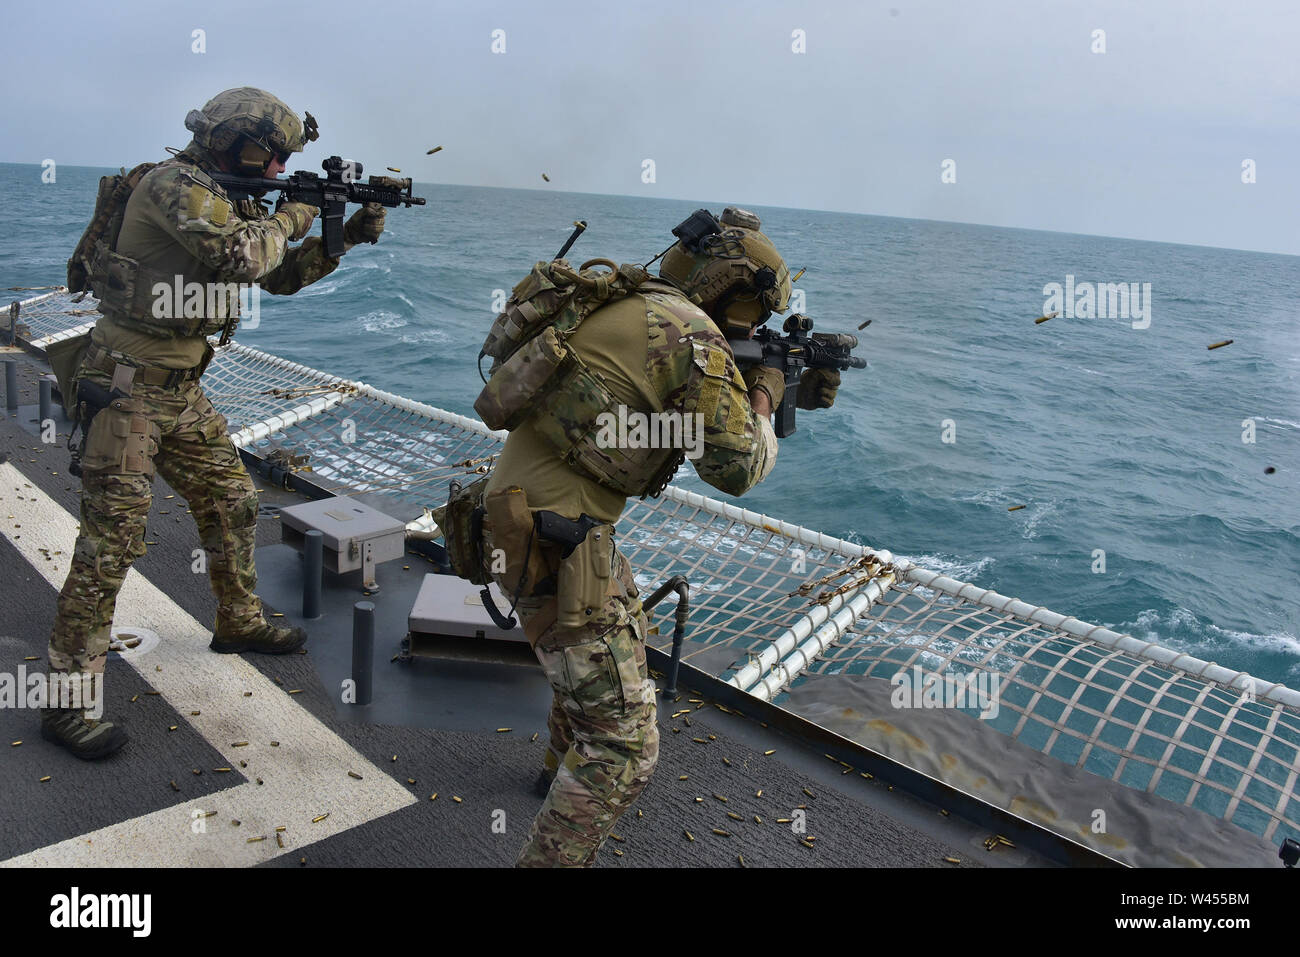 EAST CHINA SEA--Members of Maritime Security and Response Team West exercise with sidearms and rifles from the flight deck of U.S. Coast Guard Cutter Bertholf (WMSL 750) Feb. 25, 2019.   Bertholf is on a months-long deployment in support of the U.S. Navy's 7th Fleet. U.S. Coast Guard photo by Chief Petty Officer John Masson. Stock Photo